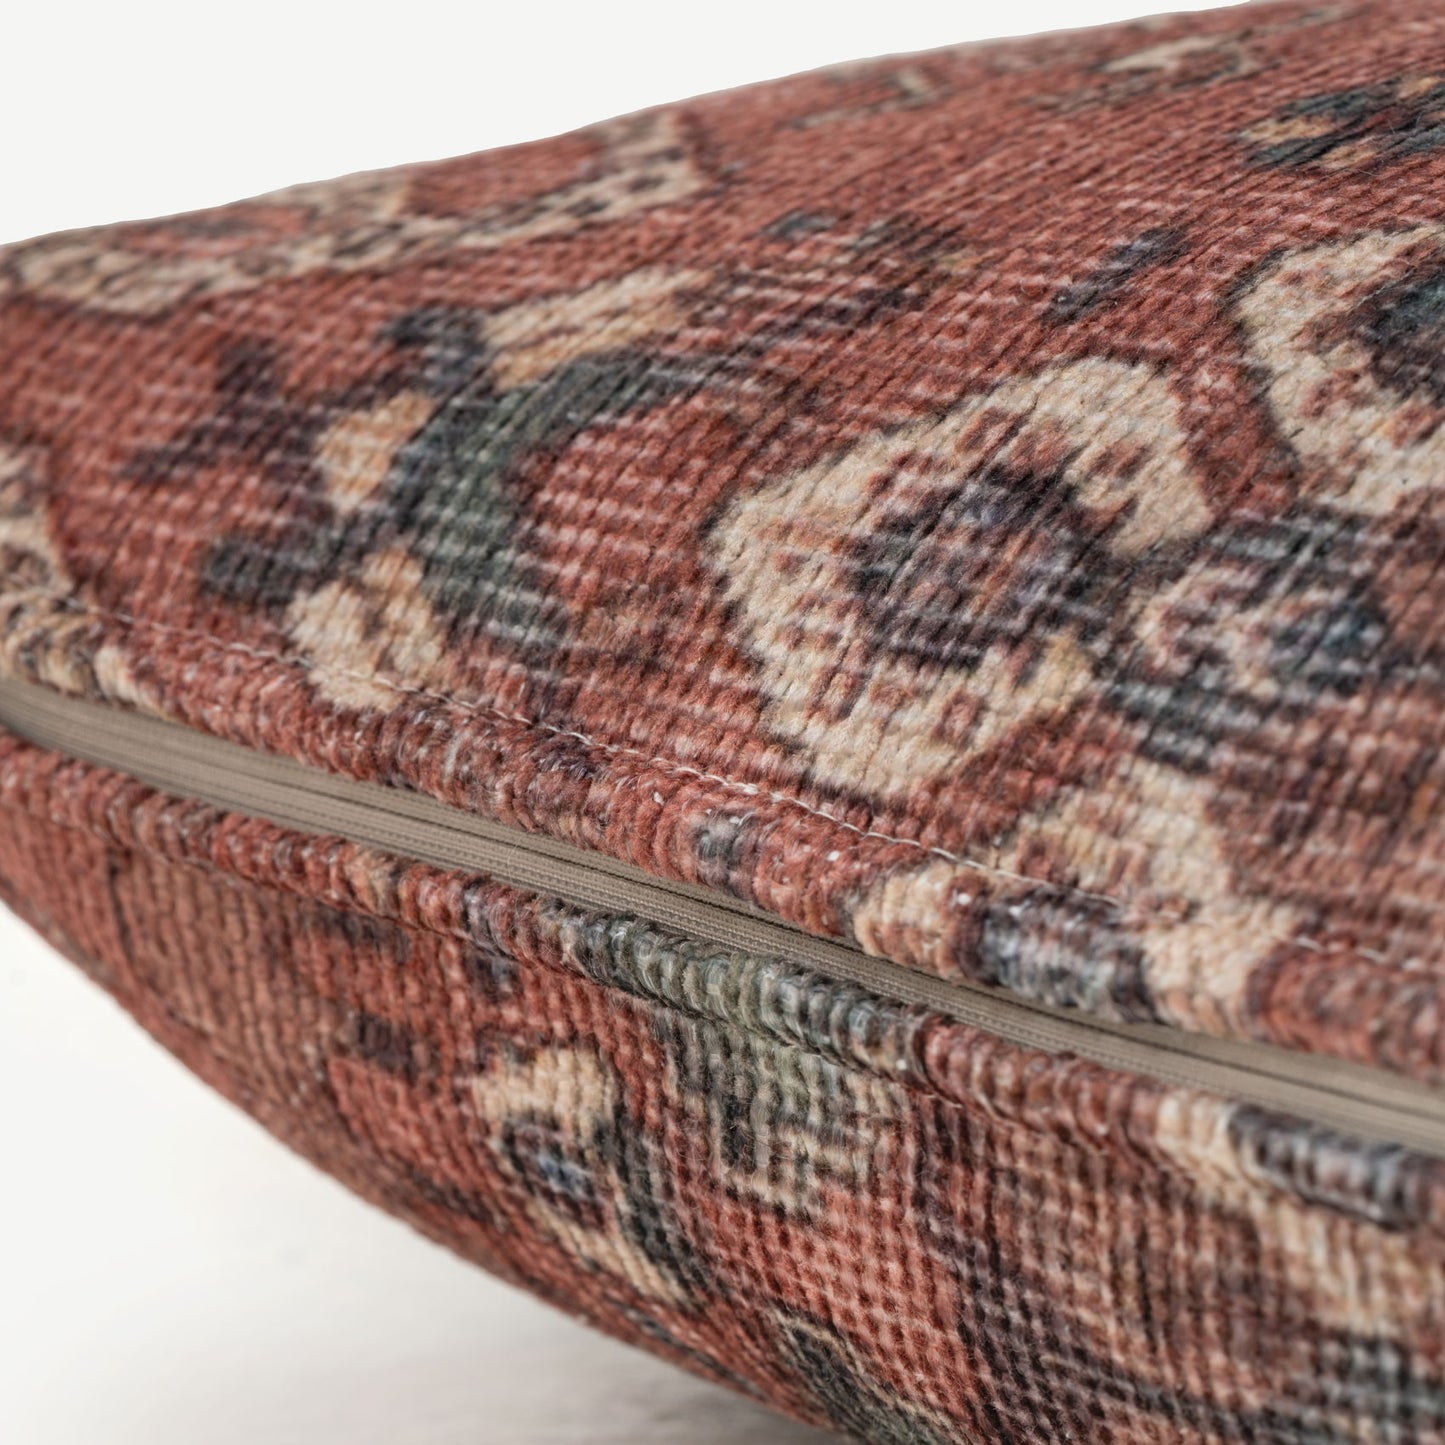 Distressed Terracotta Cushion Cover